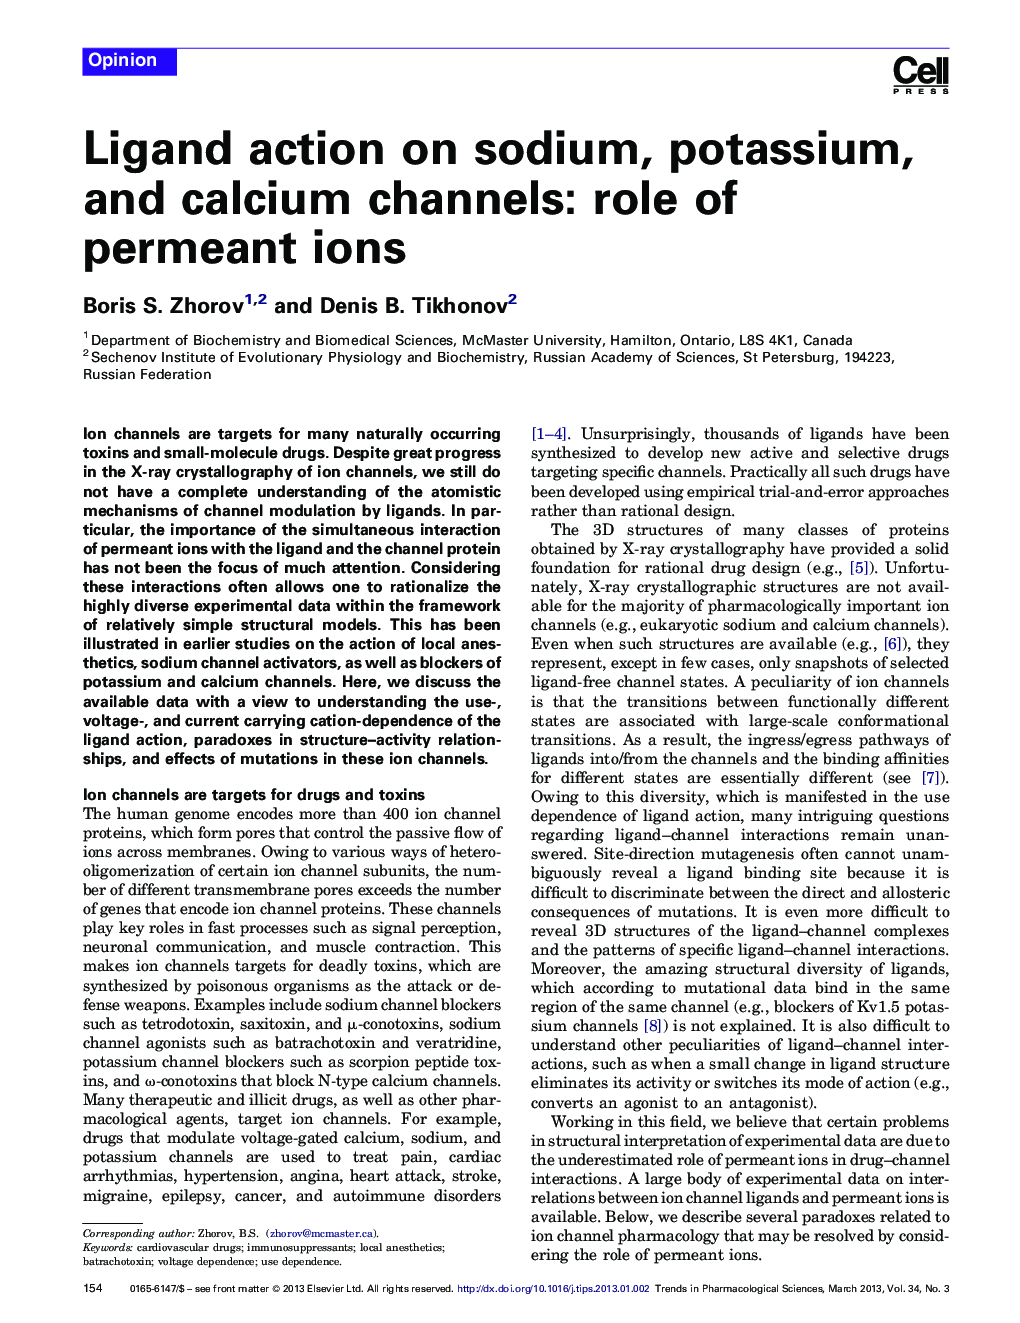 Ligand action on sodium, potassium, and calcium channels: role of permeant ions